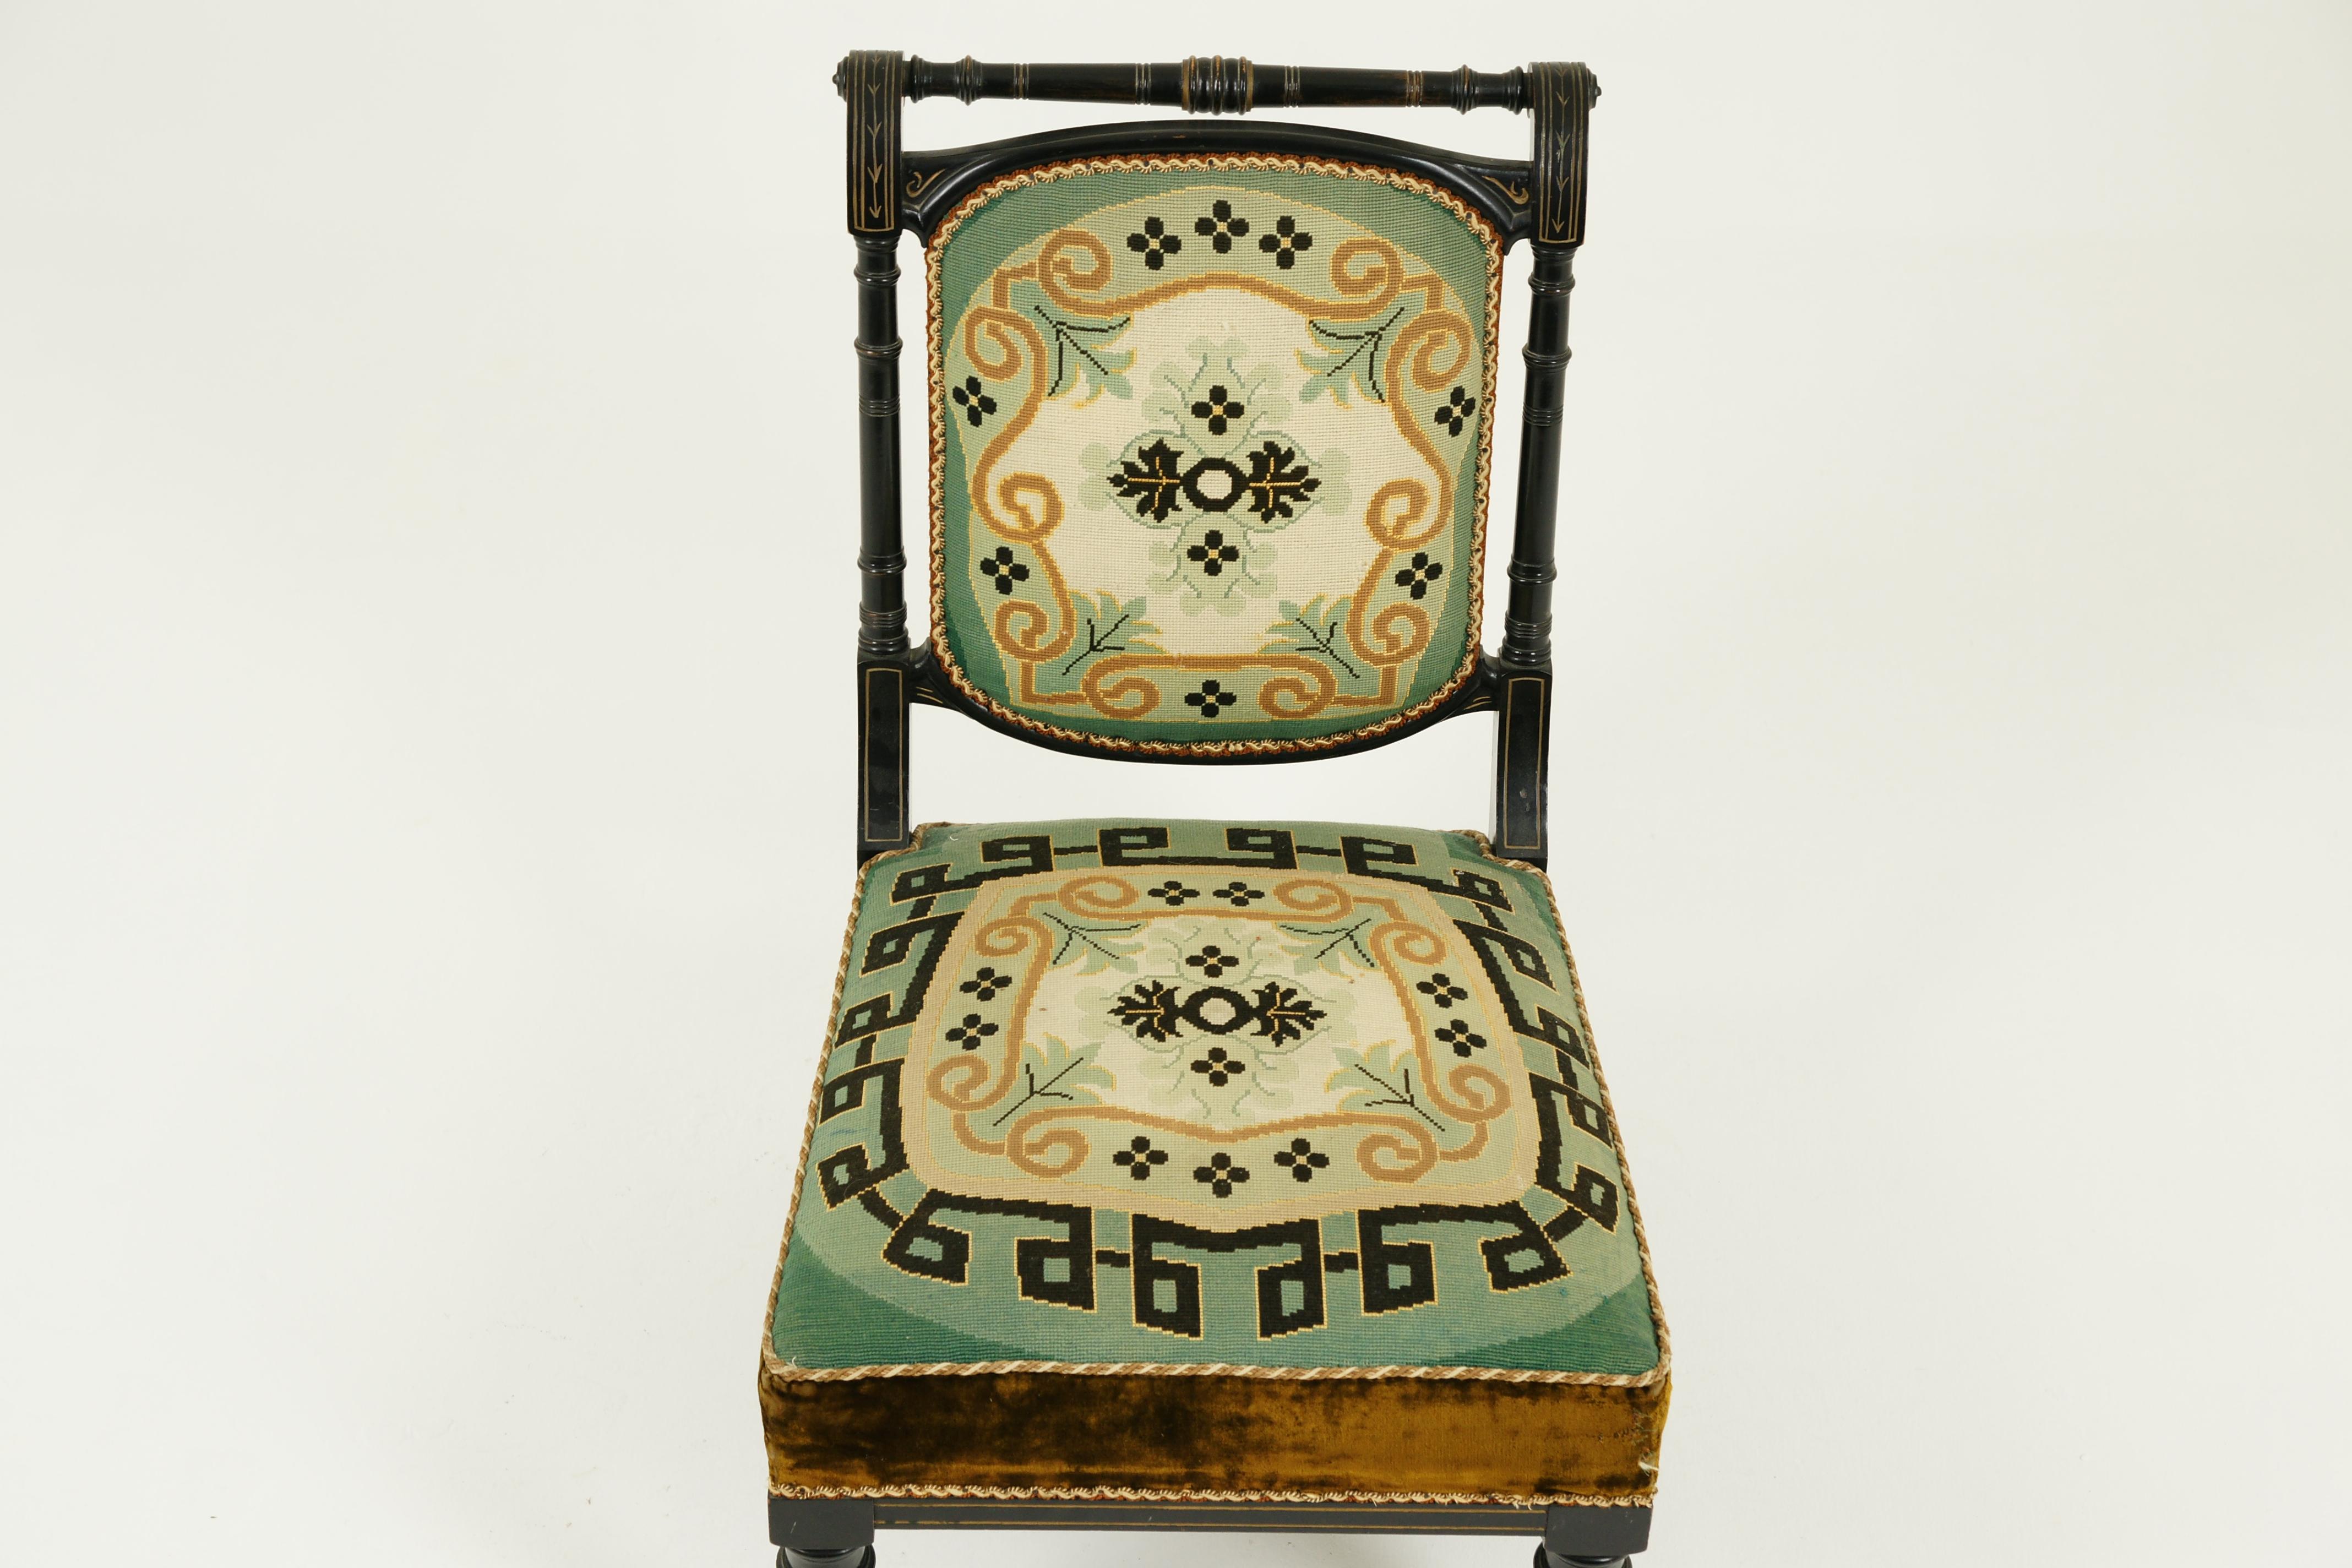 Antique prayer chair, ebonized chair, aesthetic movement, Prie Dieu, Scotland 1880, Antique Furniture, B1562

Scotland, 1880
Original finish
Turned rail on top
Turned supports to the side
Shaped show frame with crisp needlepoint back
Stuffed